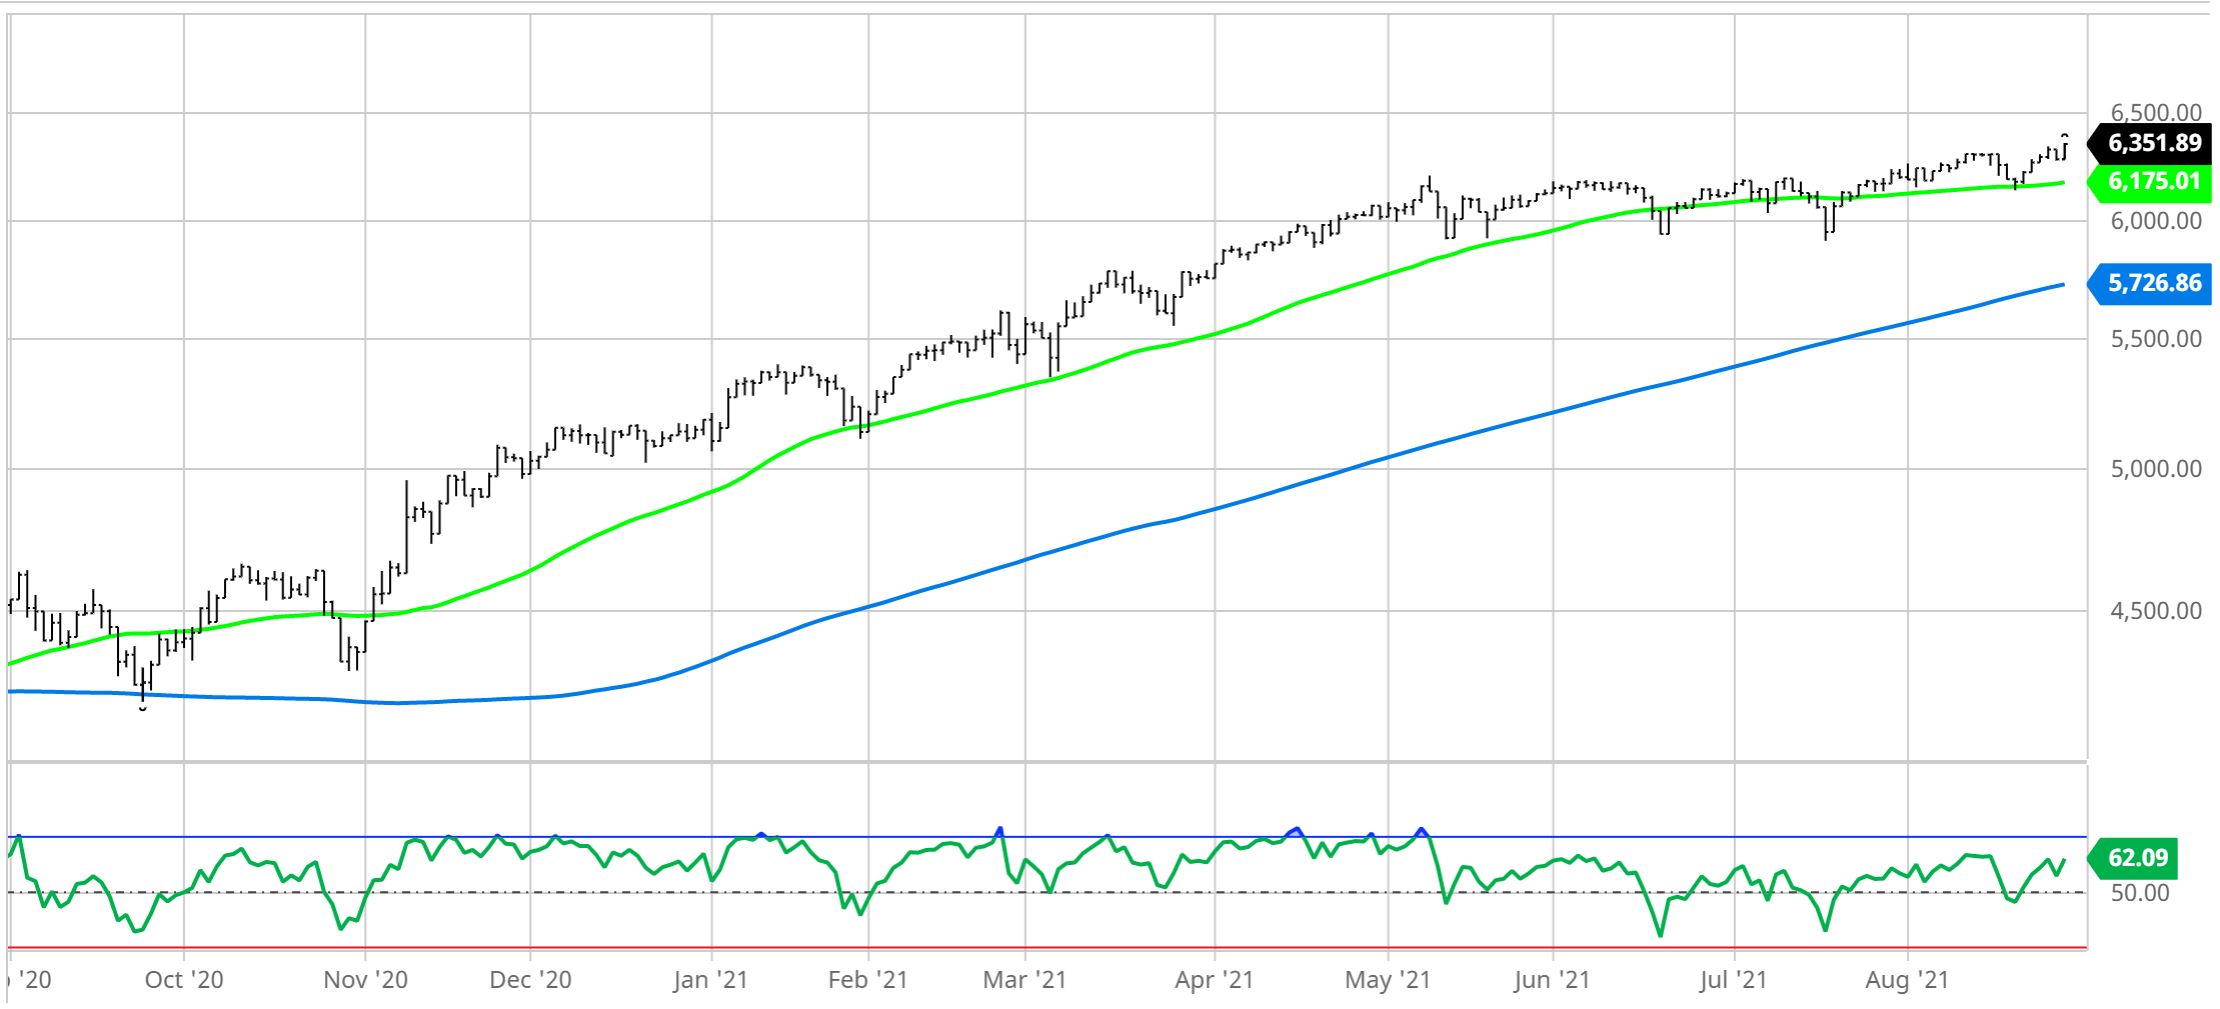 S&P 500 Equal Weighted Price Chart